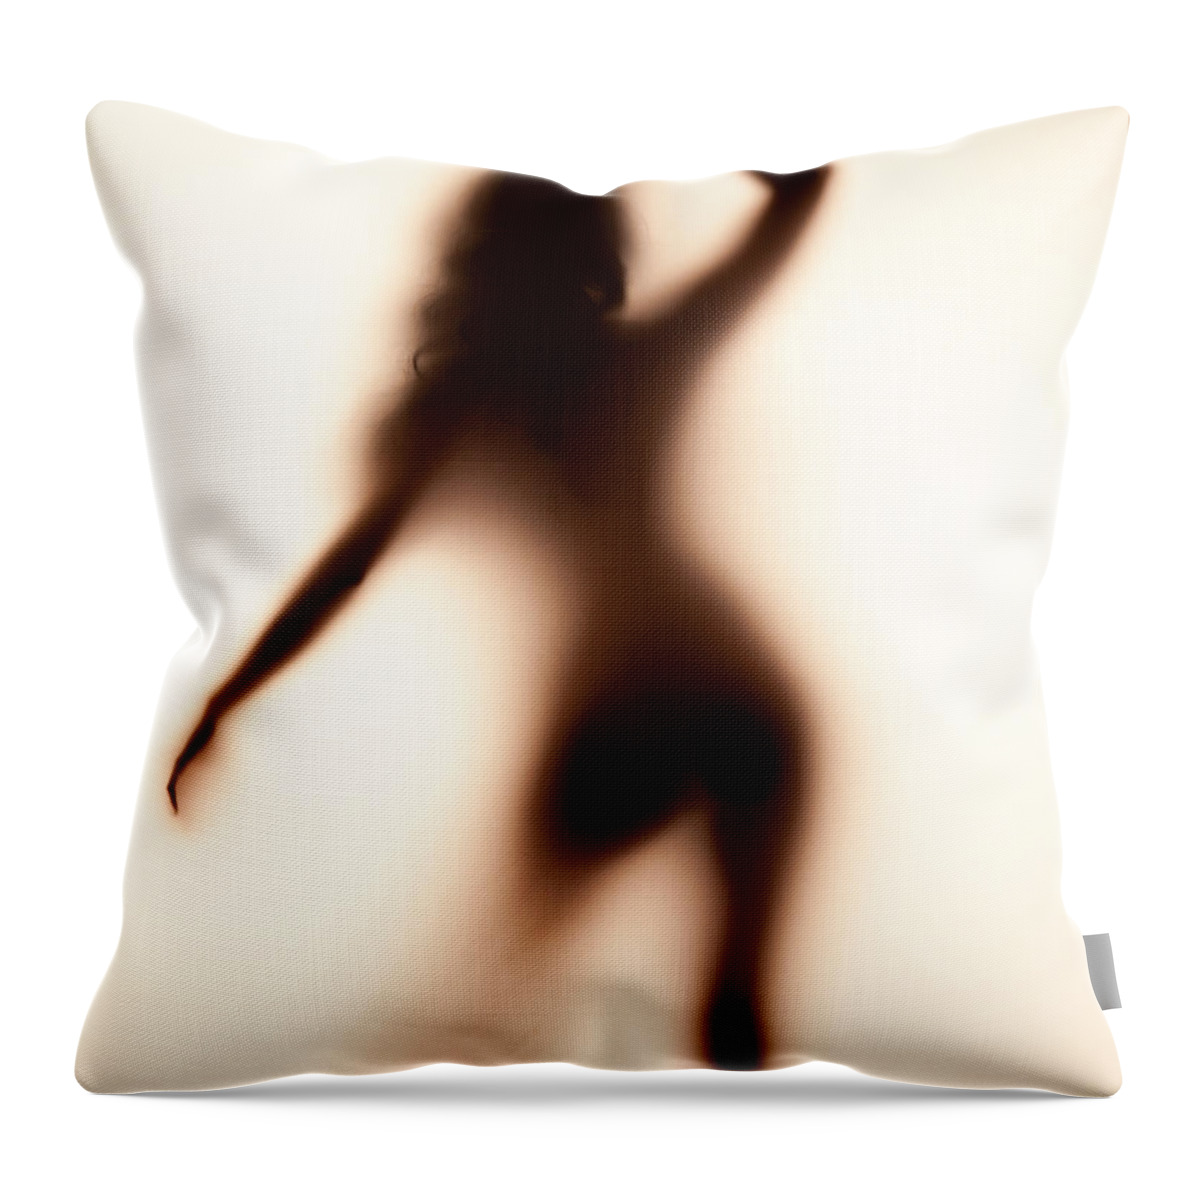 Silhouette Throw Pillow featuring the photograph Silhouette 117 by Michael Fryd